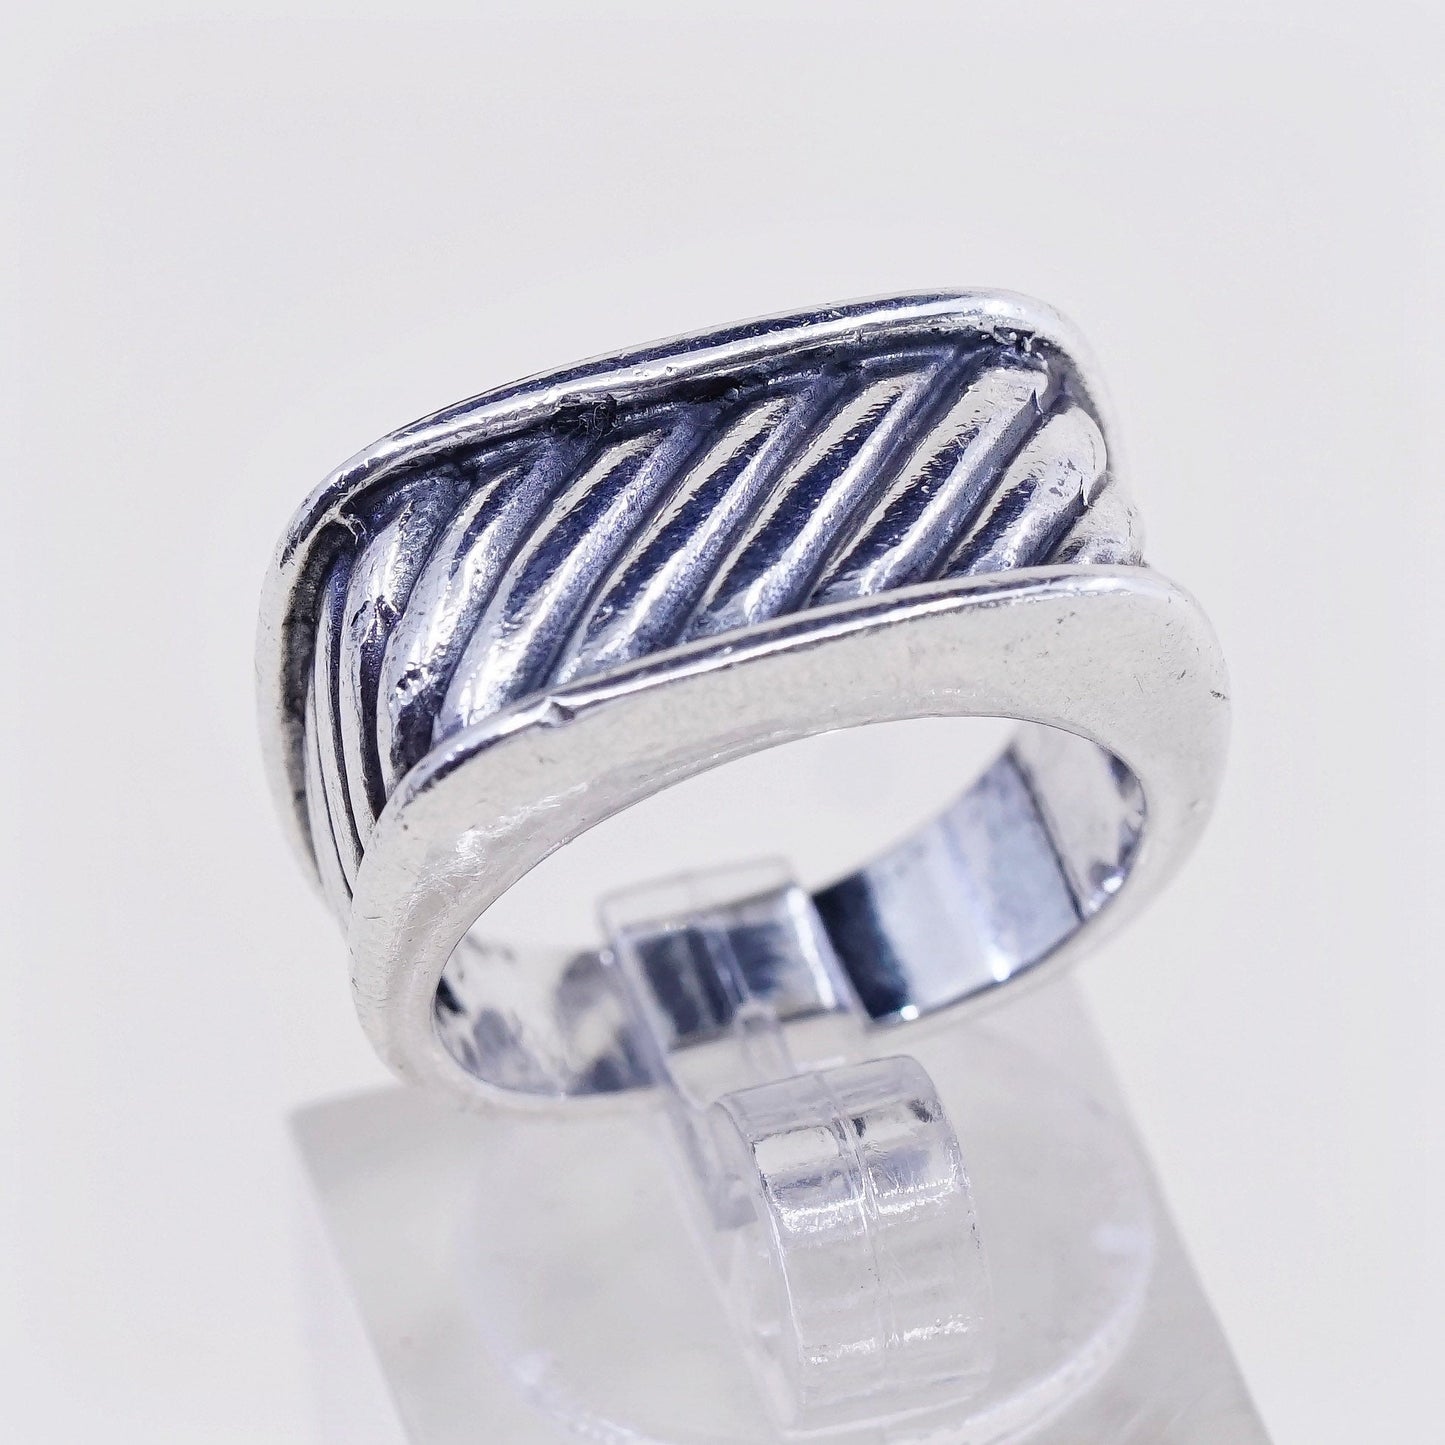 sz 6, vtg sterling silver handmade statement ring, 925 cable ribbed band